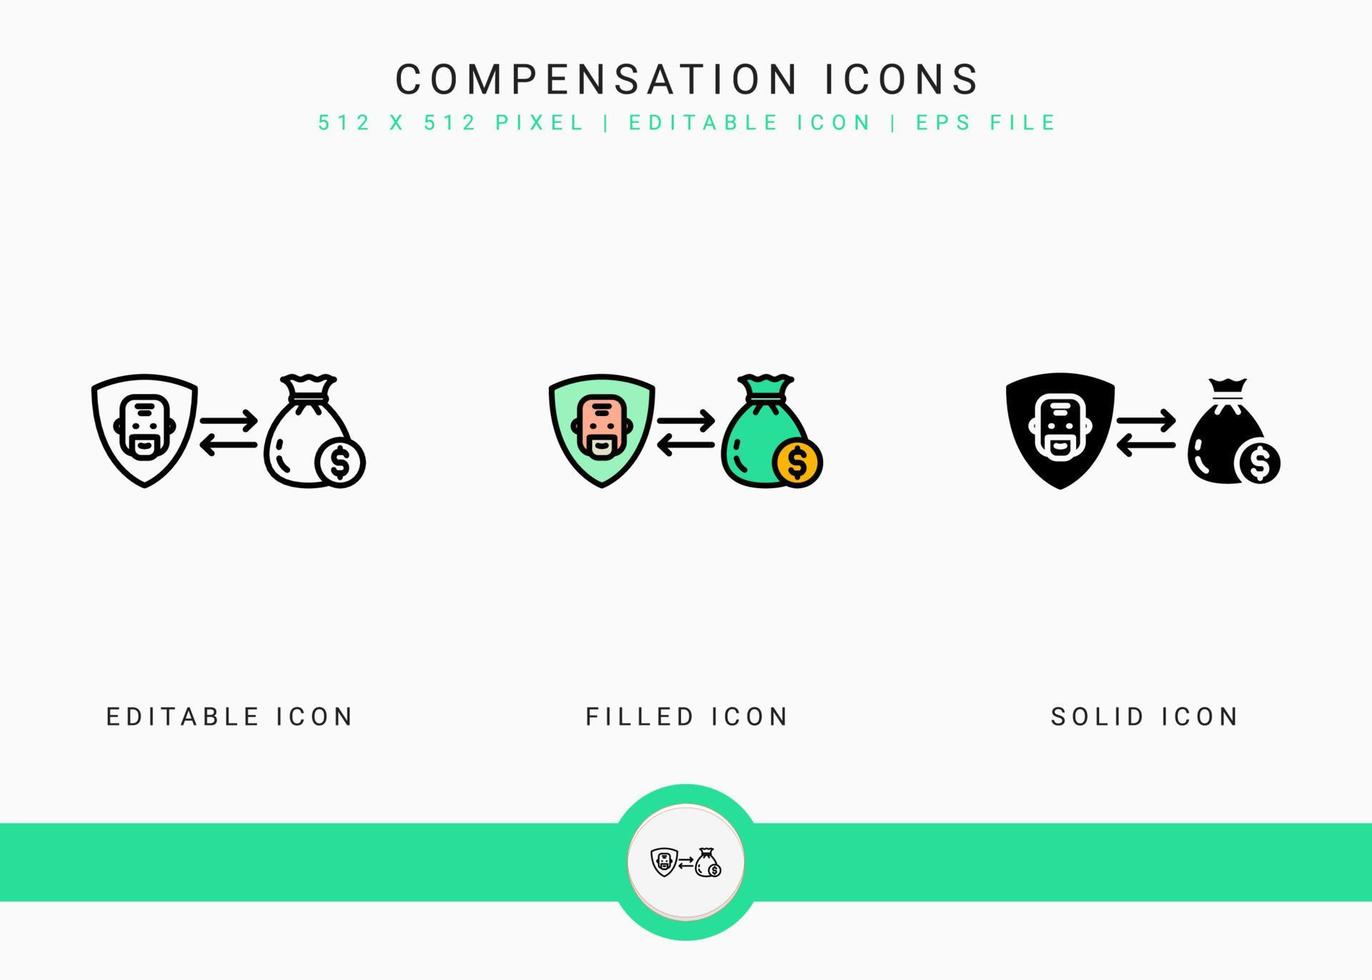 Compensation icons set vector illustration with icon line style. Pension fund plan concept. Editable stroke icon on isolated white background for web design, user interface, and mobile application